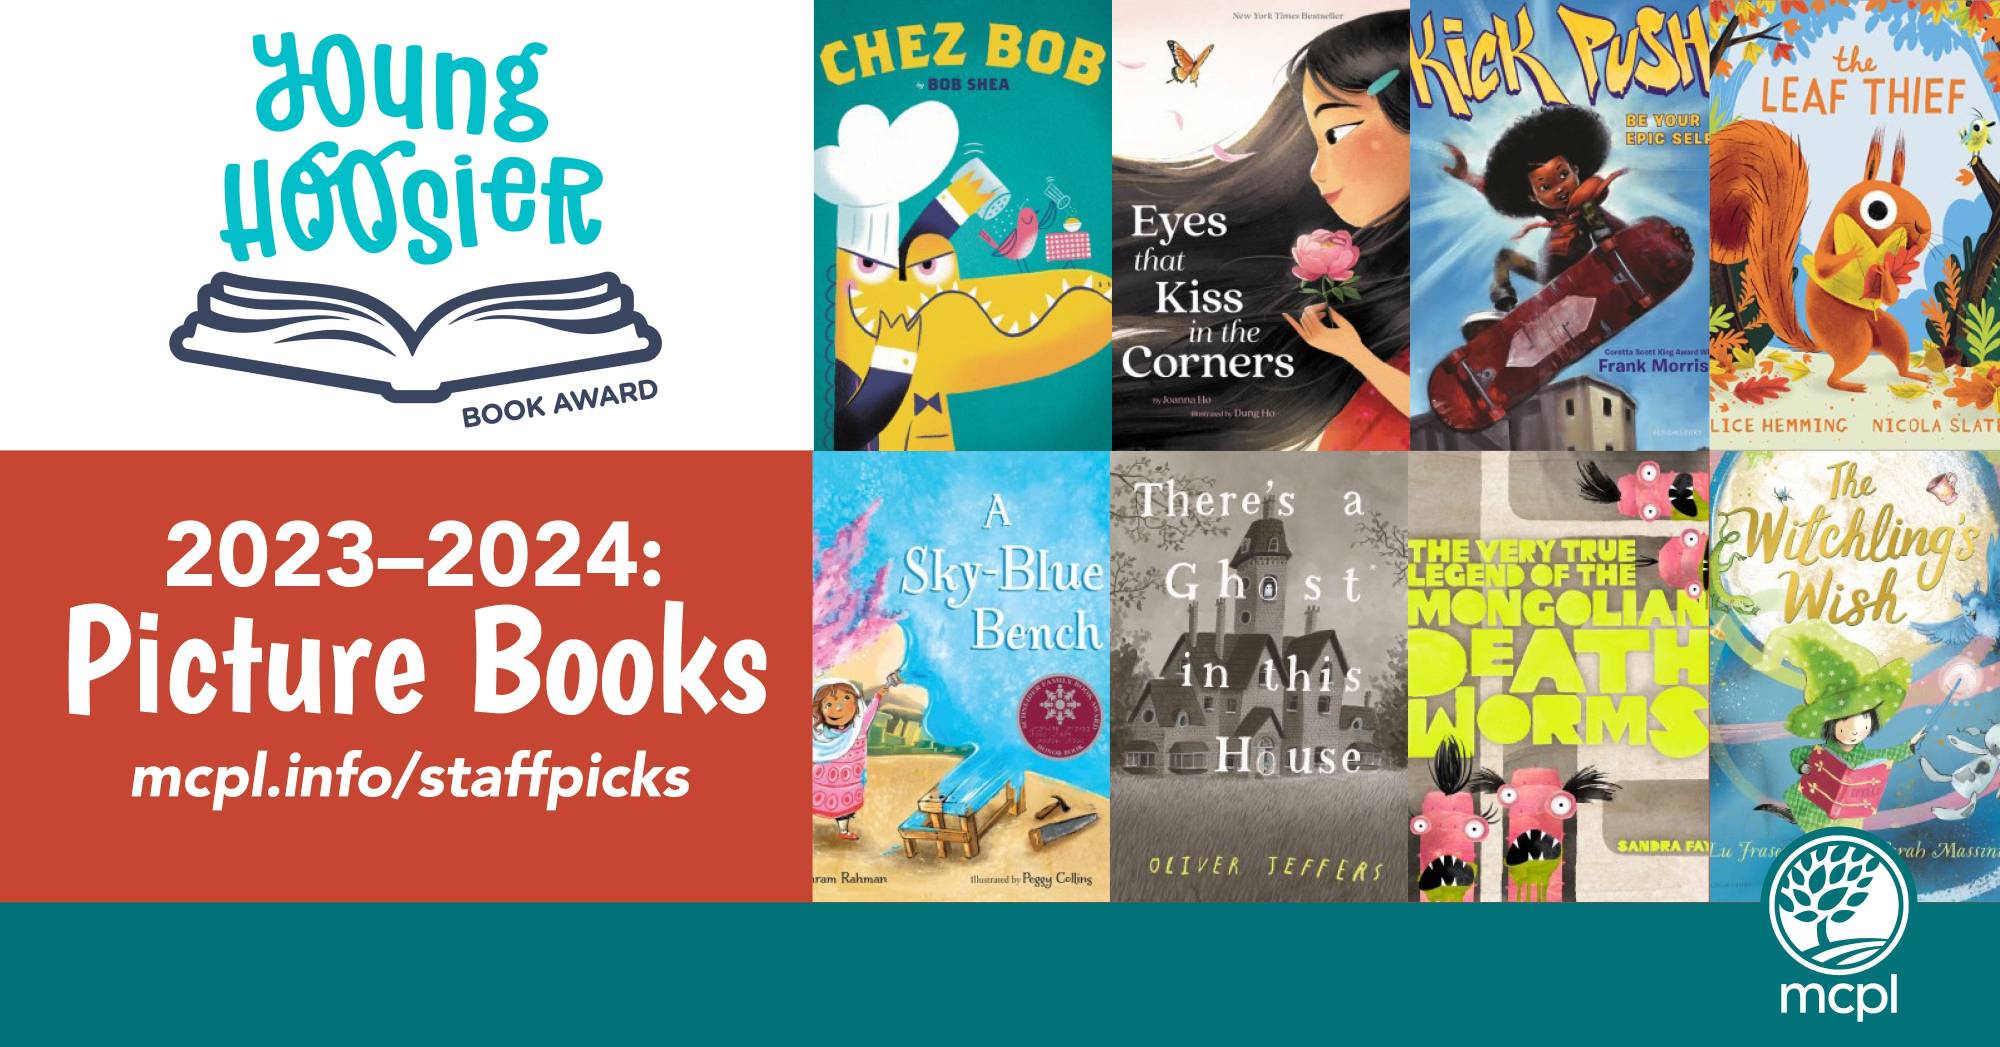 Young Hoosier Book Award 2023-2024: Picture Books